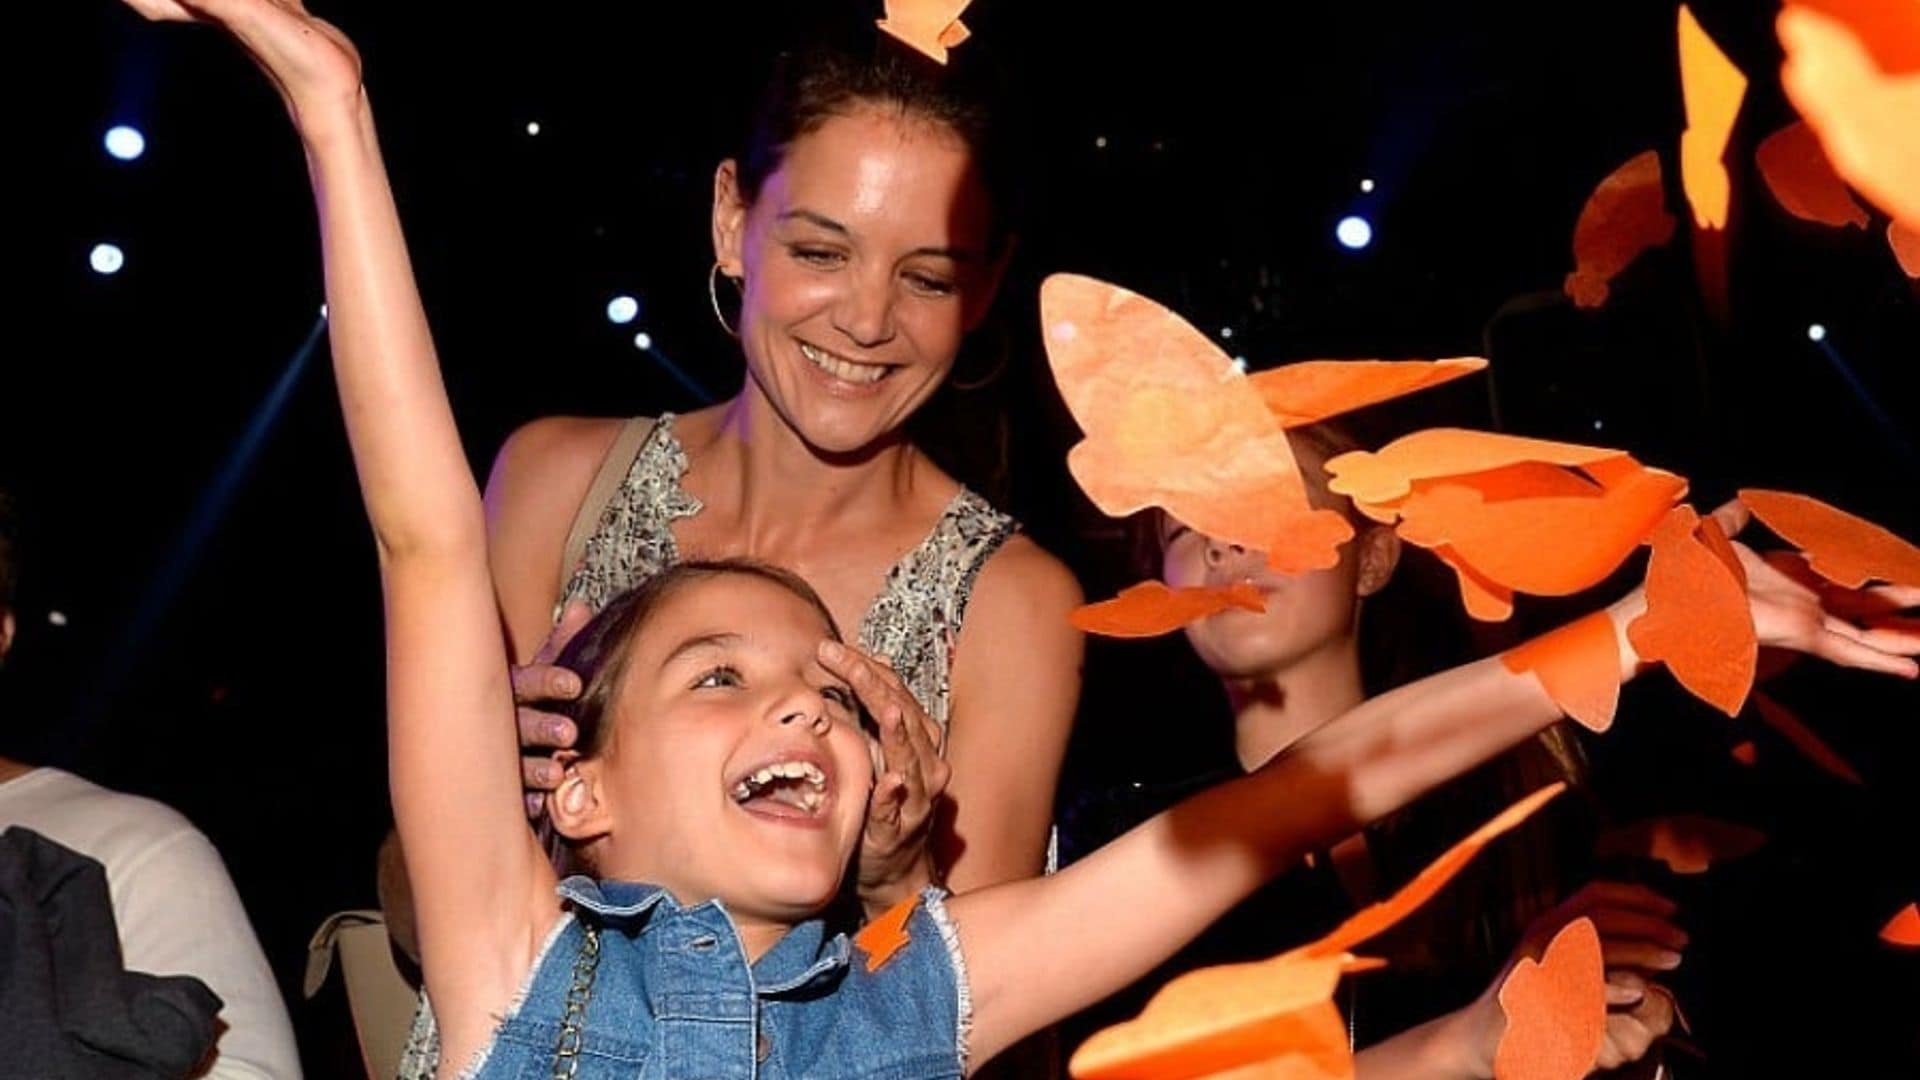 Suri Cruise is in awe of Leona Lewis after seeing 'Cats' on Broadway with mom Katie Holmes